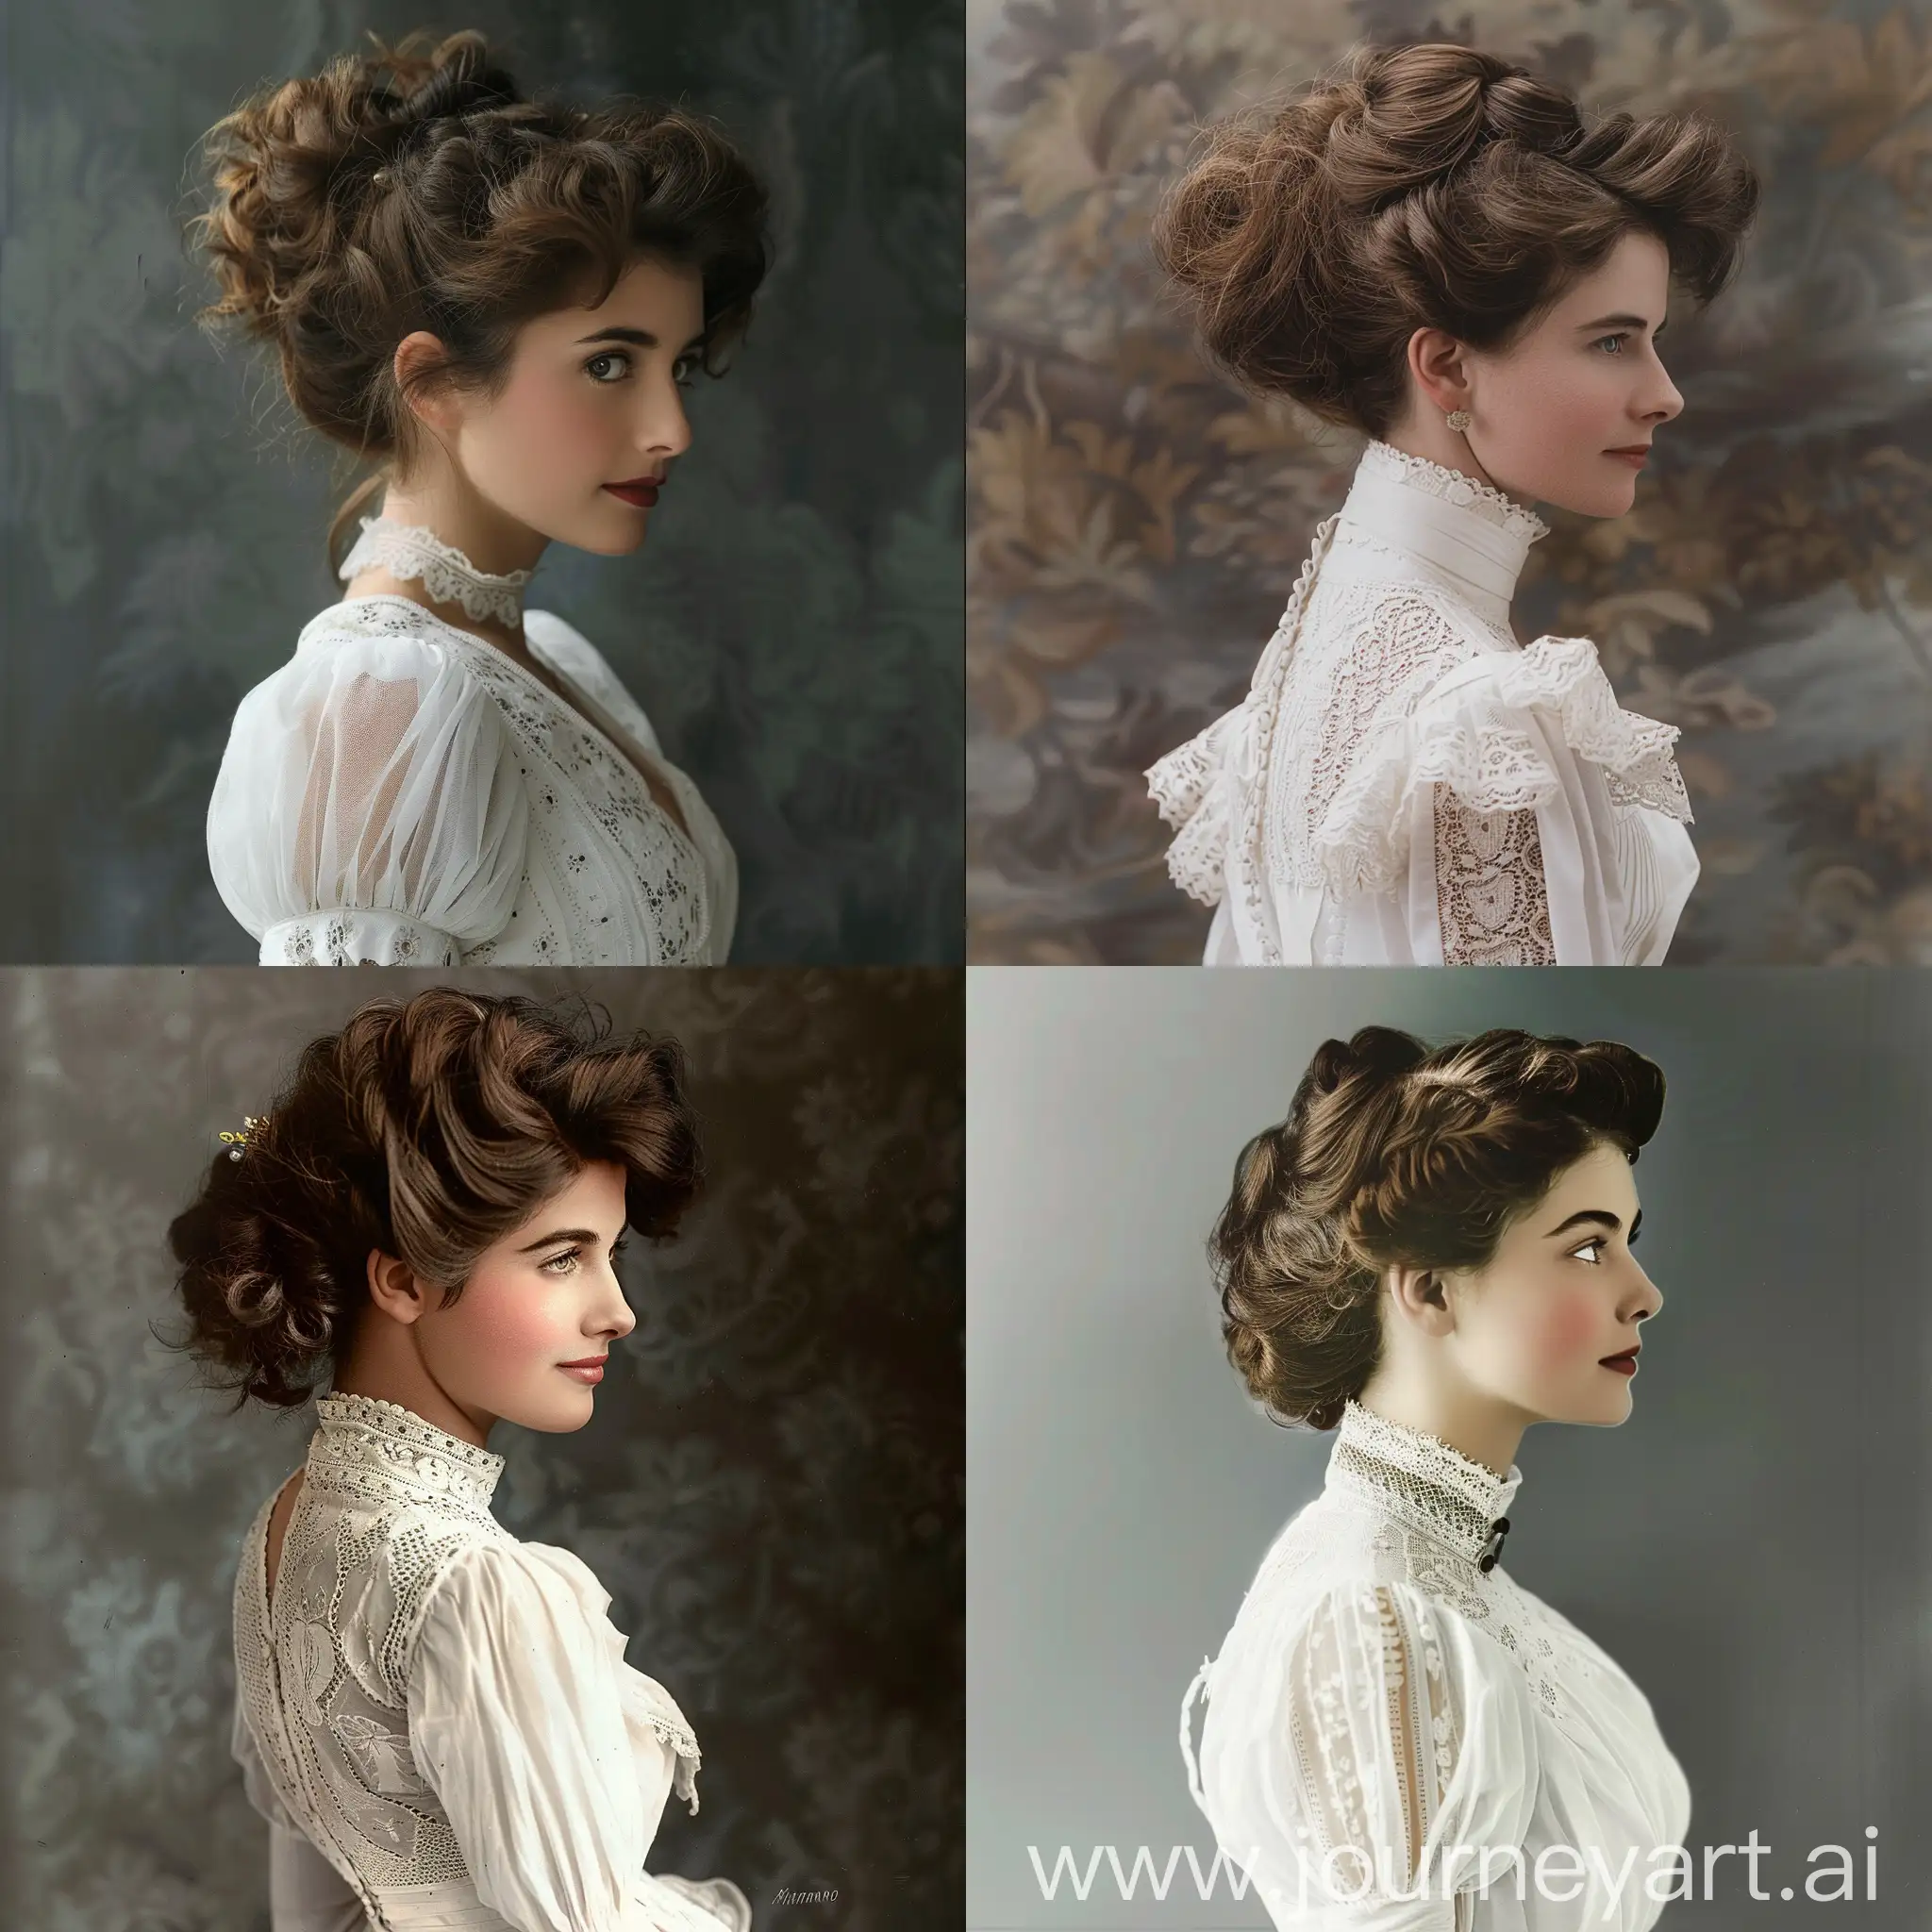 Elegant-Woman-from-the-1910s-in-White-Dress-and-Mendrano-Hairstyle